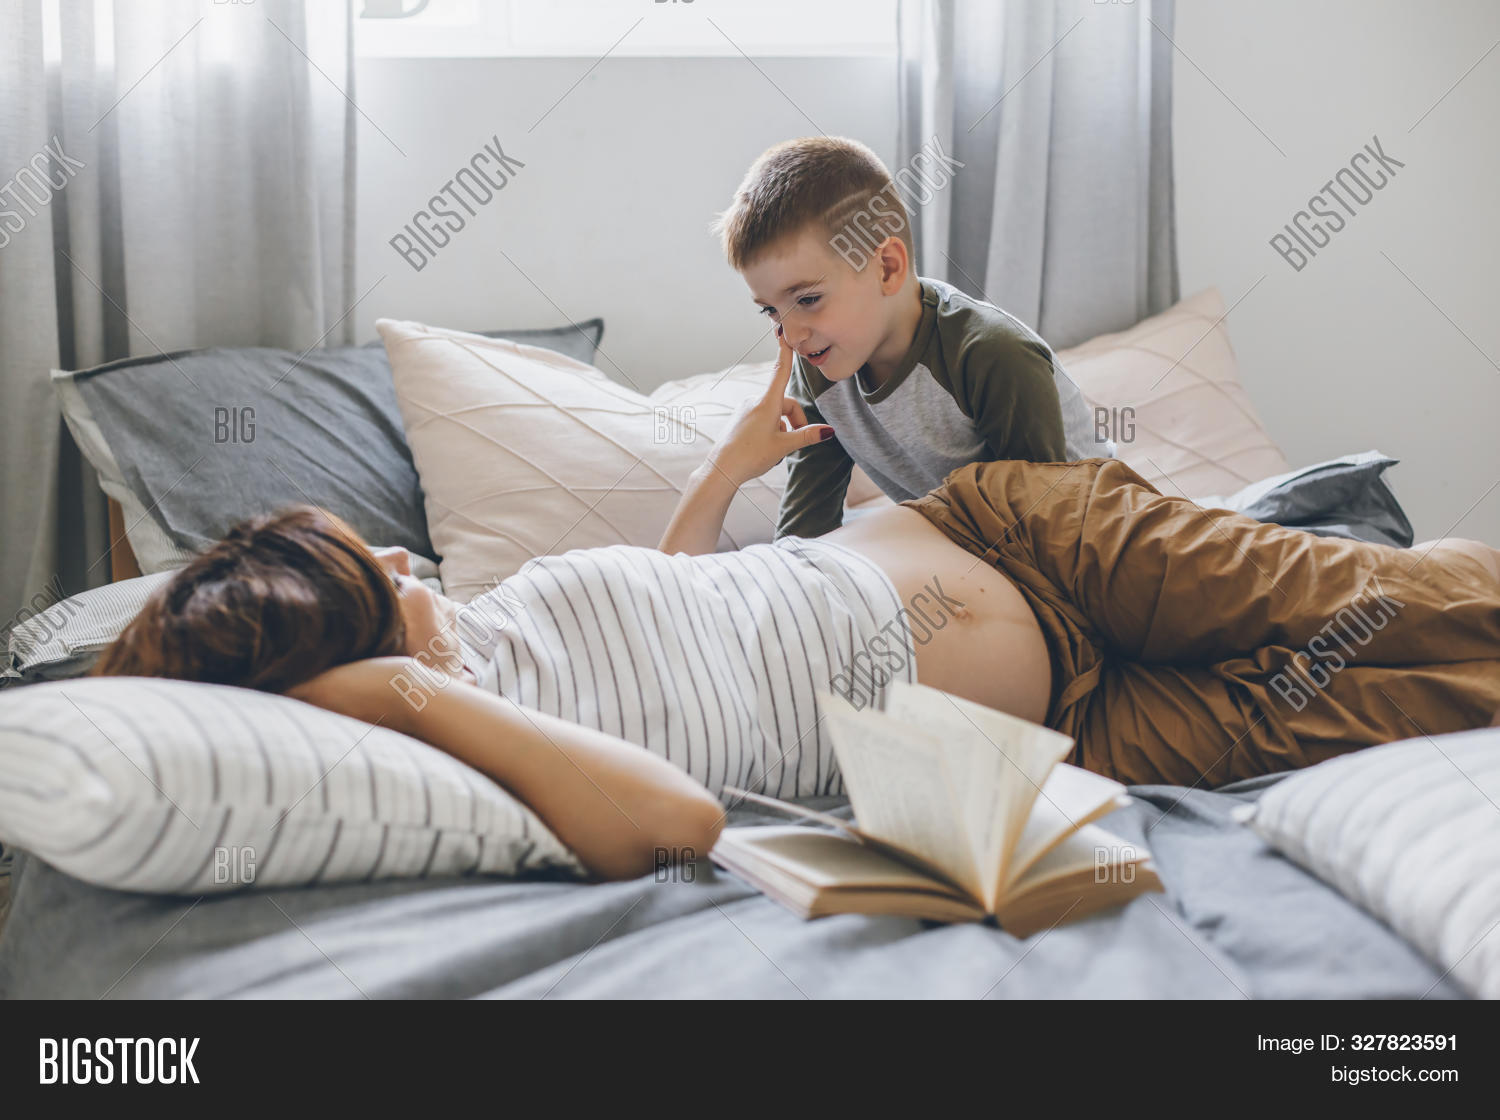 mom and son share same bed